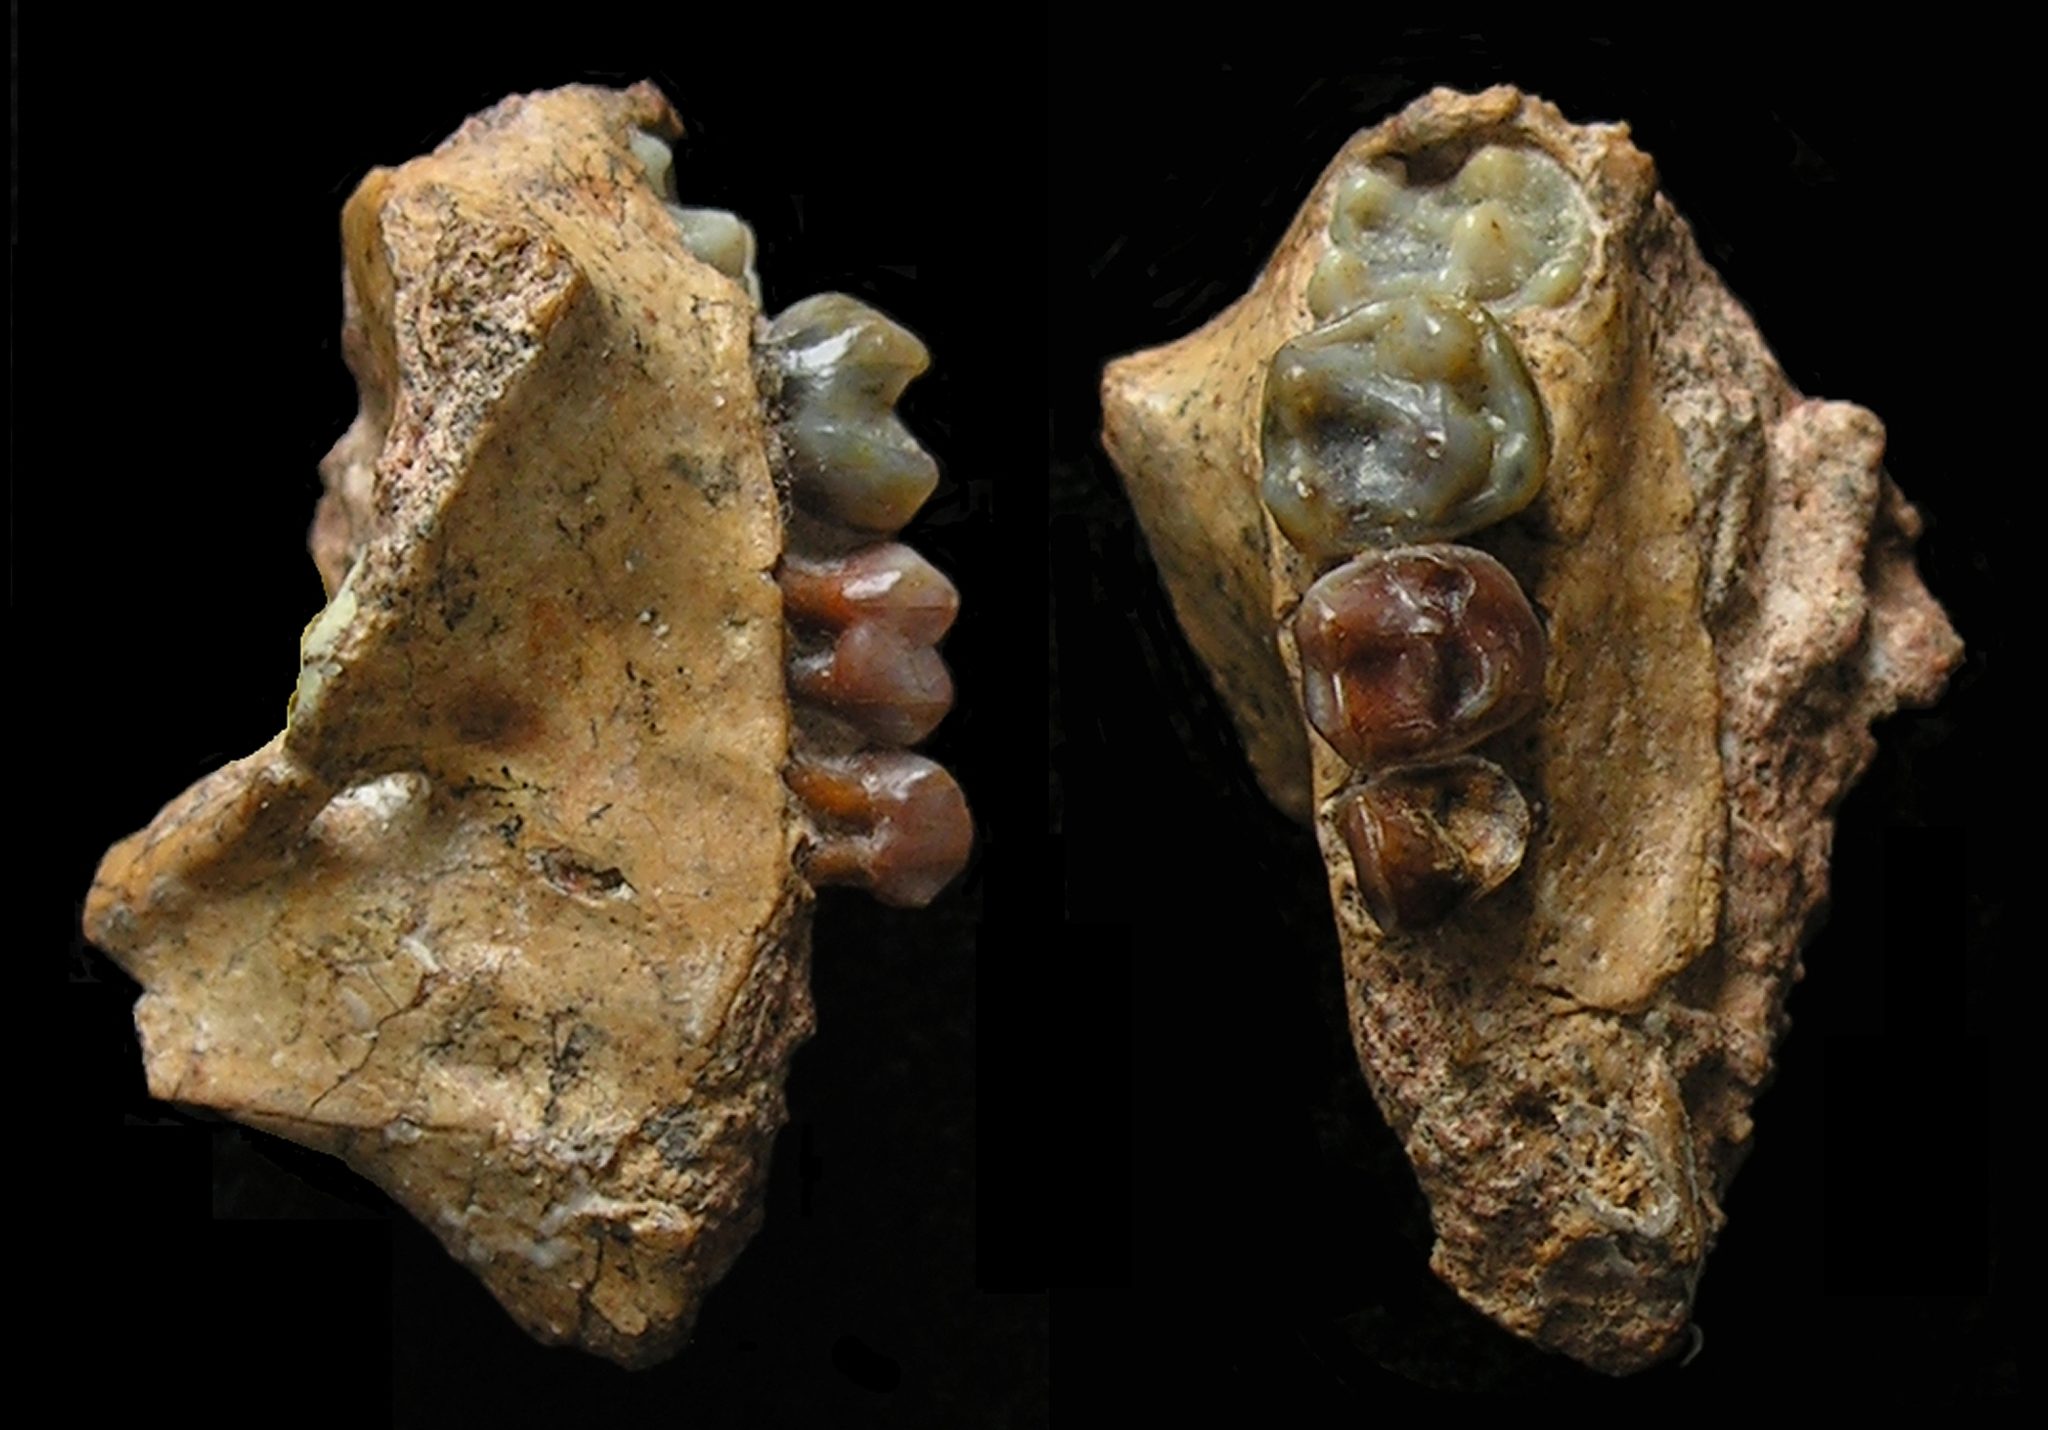 Upper Jaw of the Infant of Yuanmoupithecus